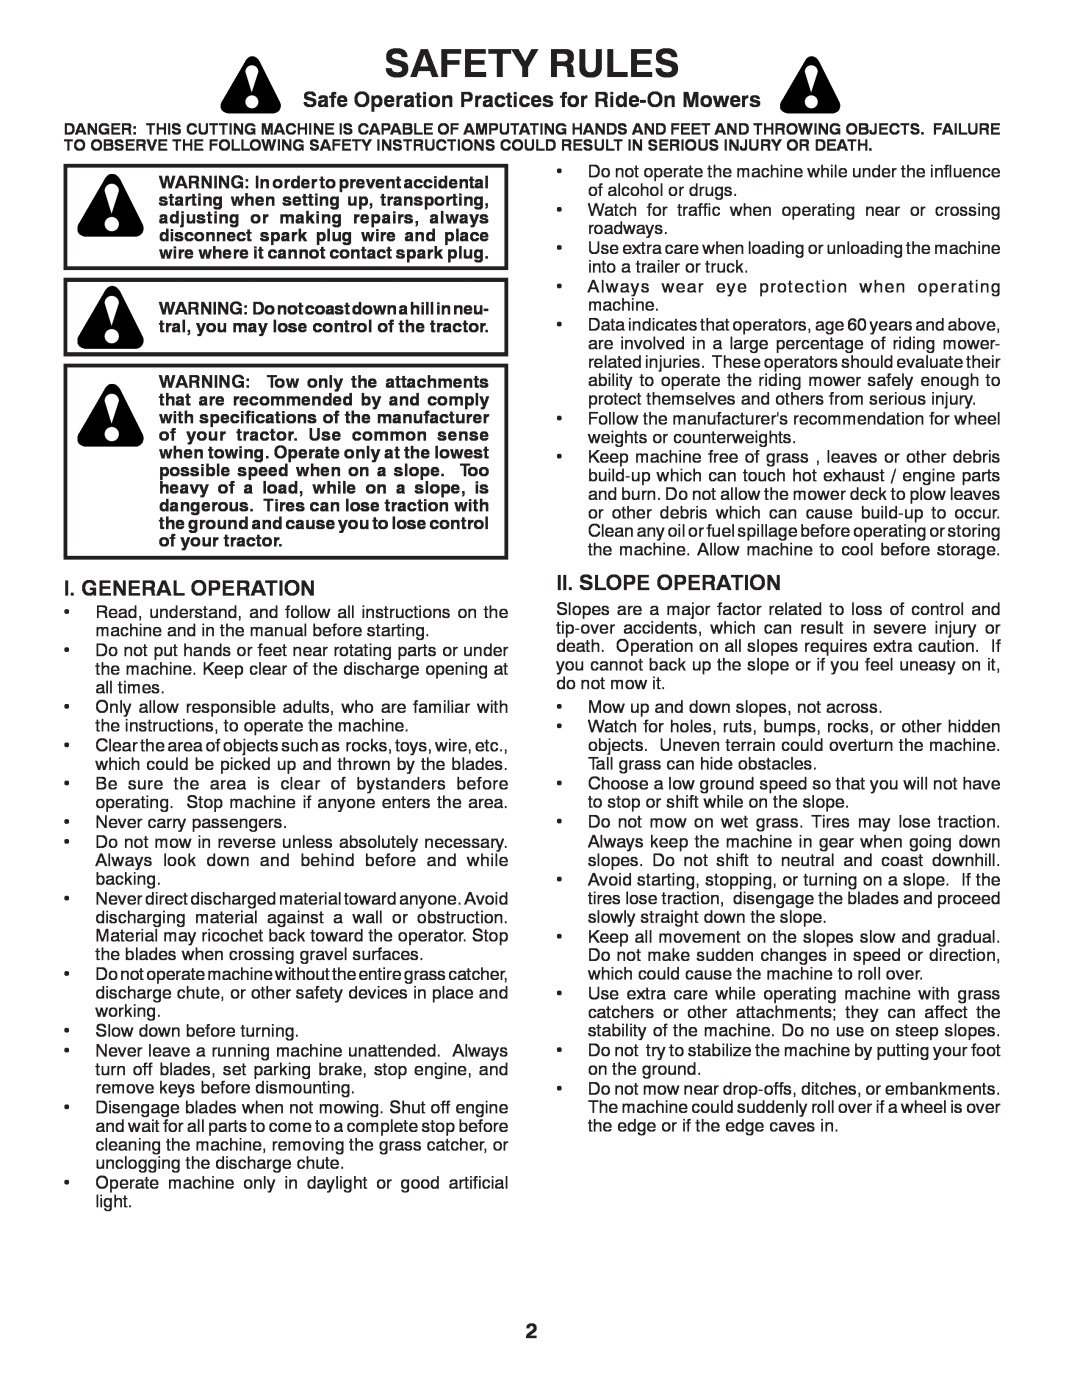 McCulloch 96041011501 Safety Rules, Safe Operation Practices for Ride-OnMowers, I. General Operation, Ii. Slope Operation 